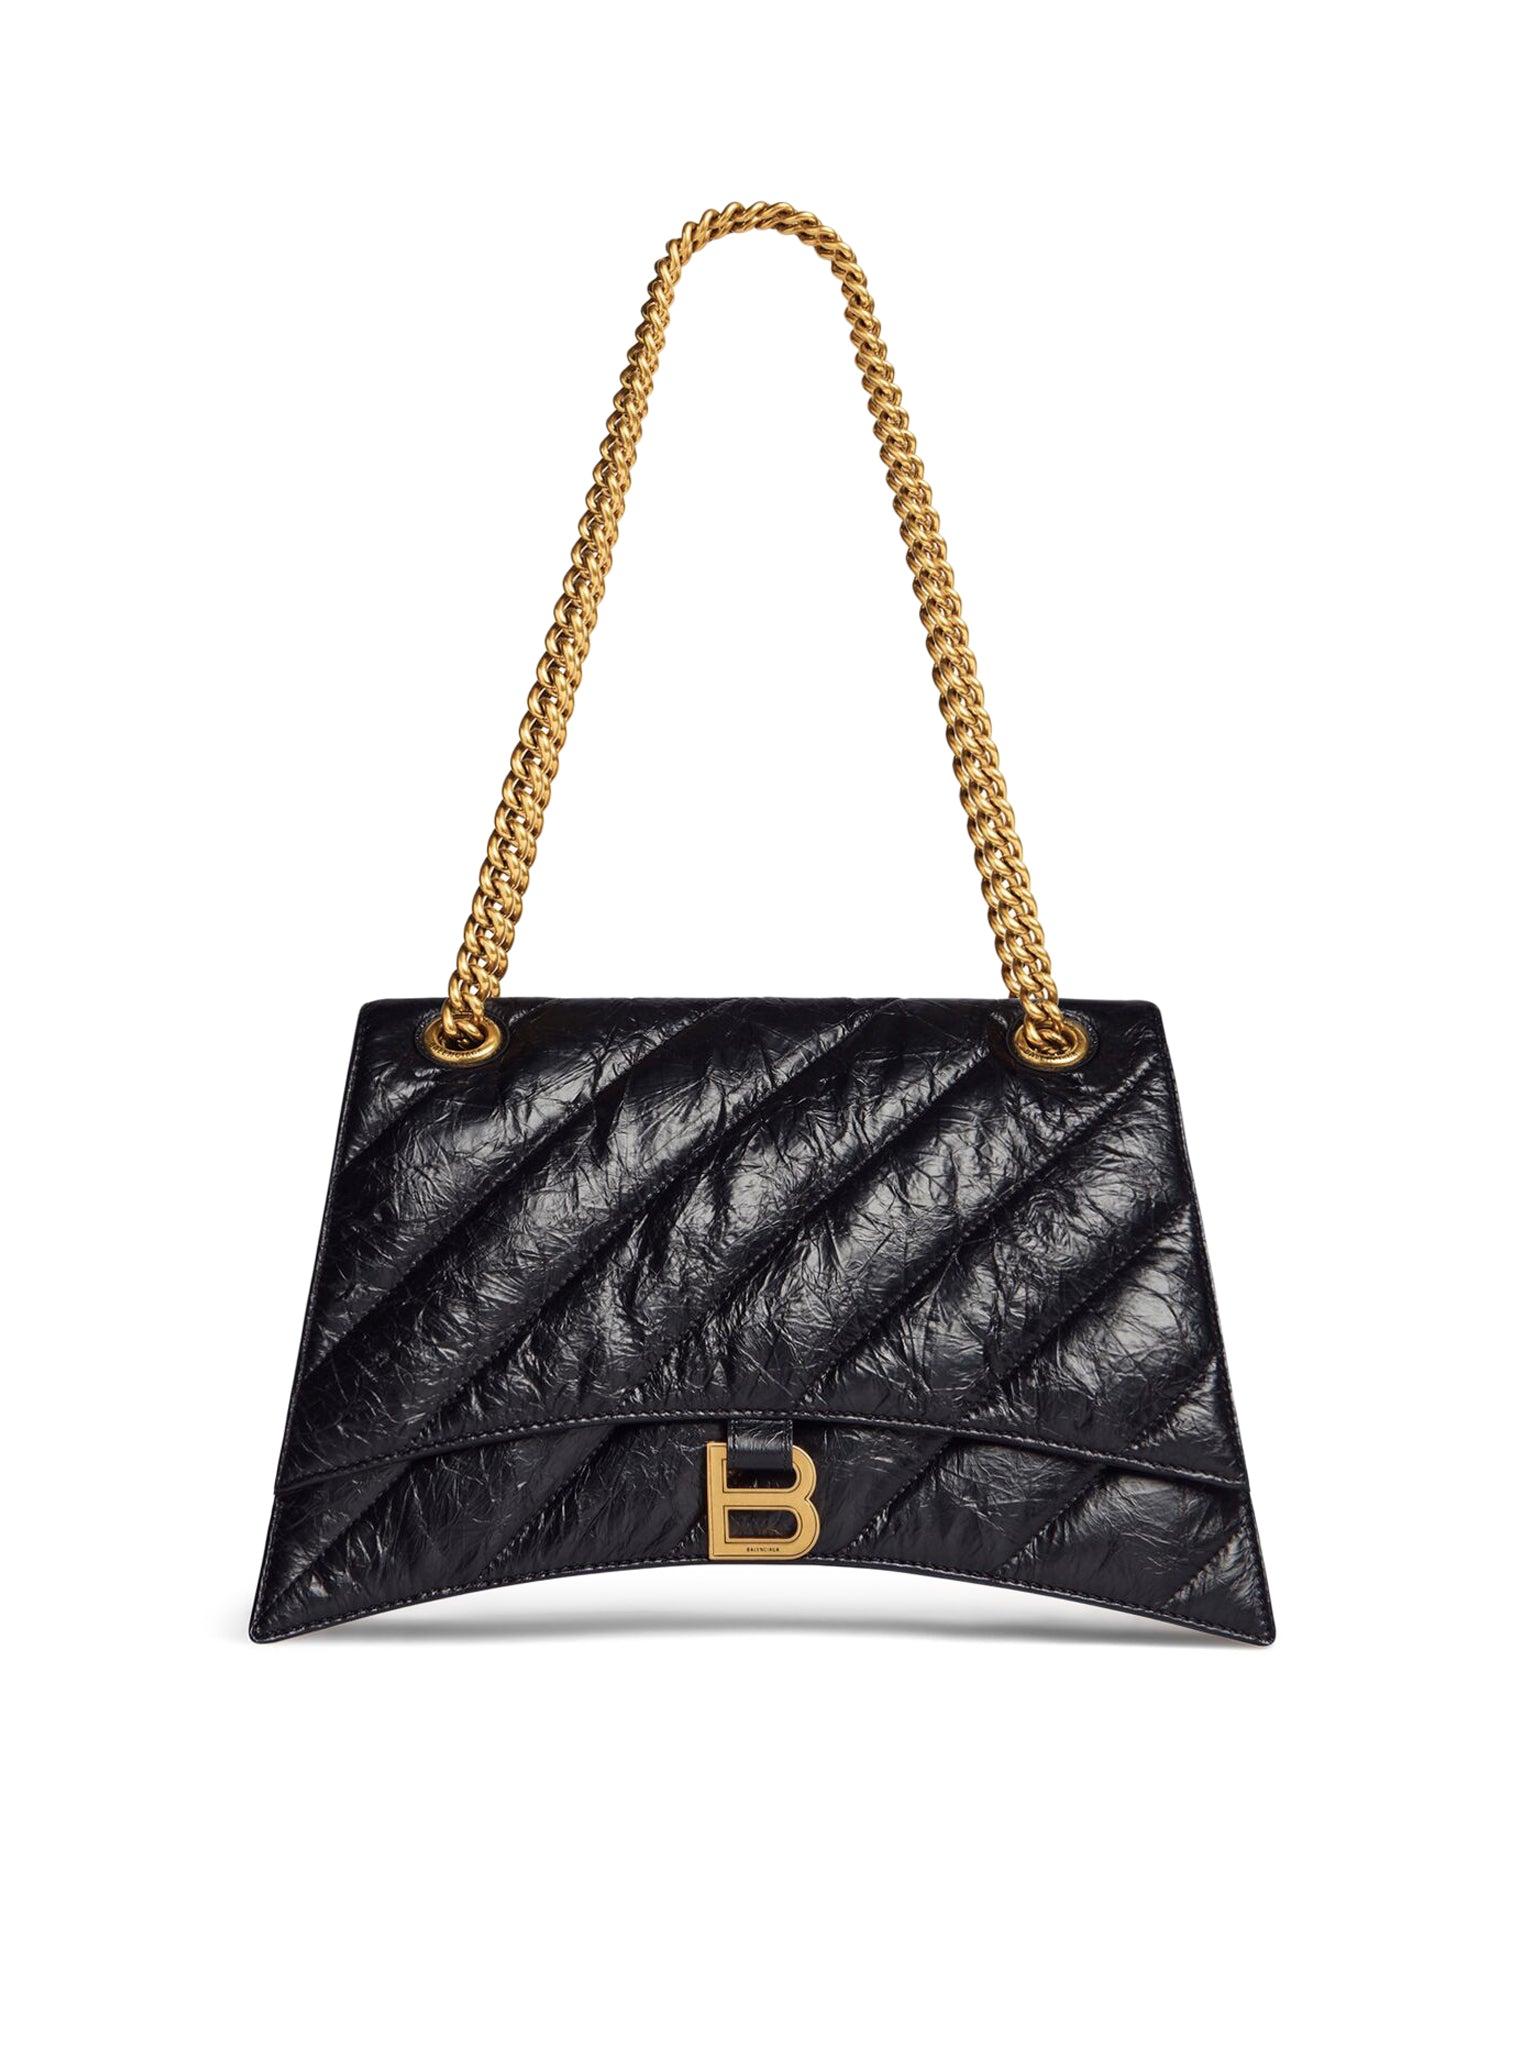 CRUSH BAG WITH MEDIUM QUILTED CHAIN FOR WOMEN IN BLACK